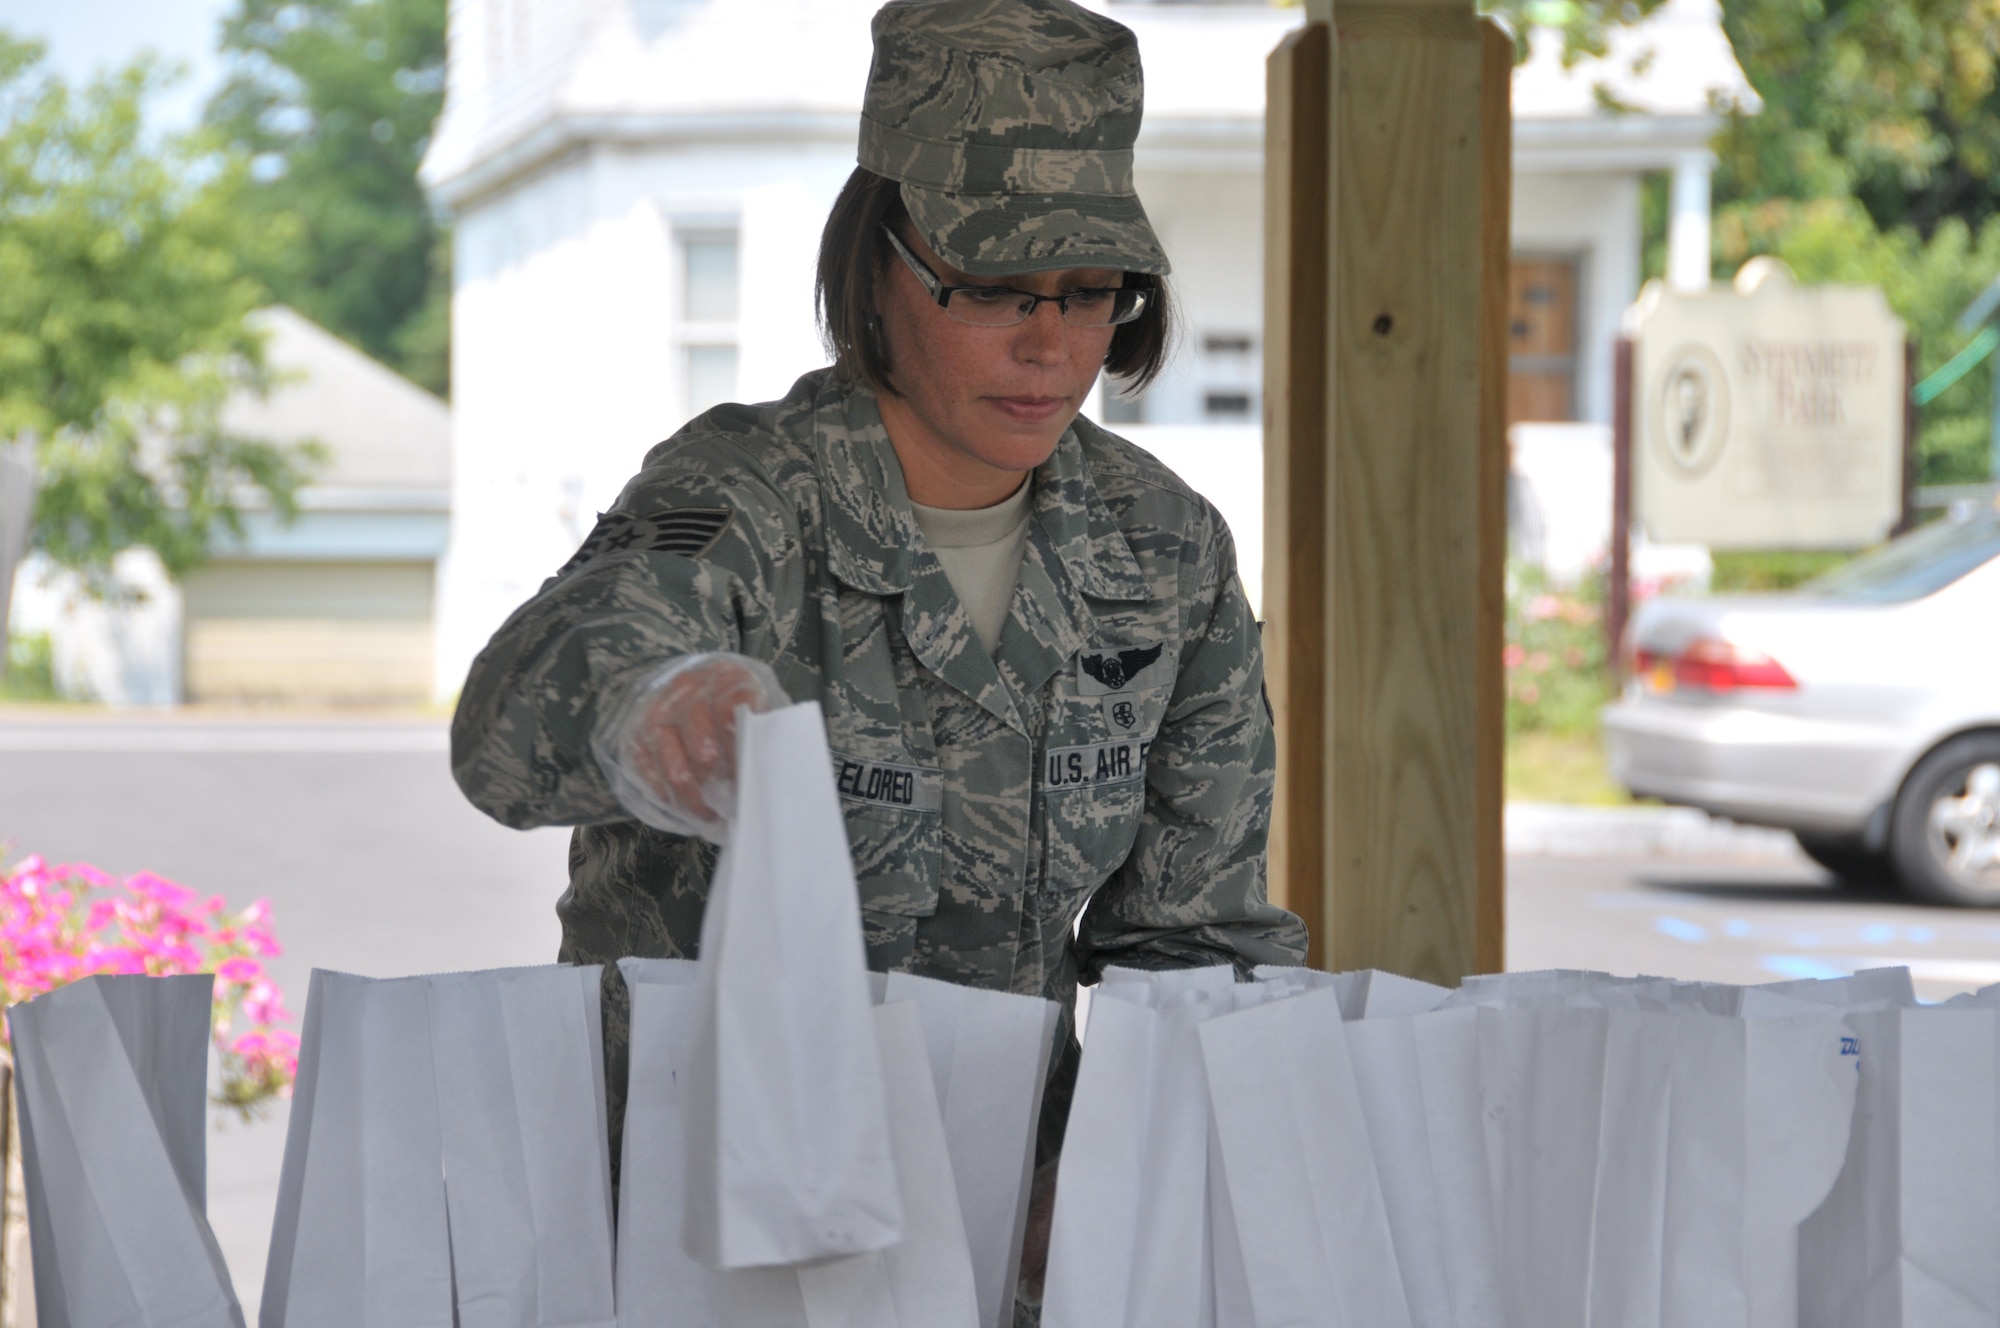 Tech. Sgt. Sara Eldred, 139th Aeromedical Evacuation Squadron, hands out lunches to youth at Steinmetz Park in Schenectady, New York, July 25, 2014. About 30 Airmen from the 109th Airlift Wing volunteered throughout the week to help with Schenectady Inner City Ministry's Summer Lunch Program. The ministry has been providing free lunches to youth throughout Schenectady for 20 years. (U.S. Air National Guard photo by Tech. Sgt. Catharine Schmidt/Released)